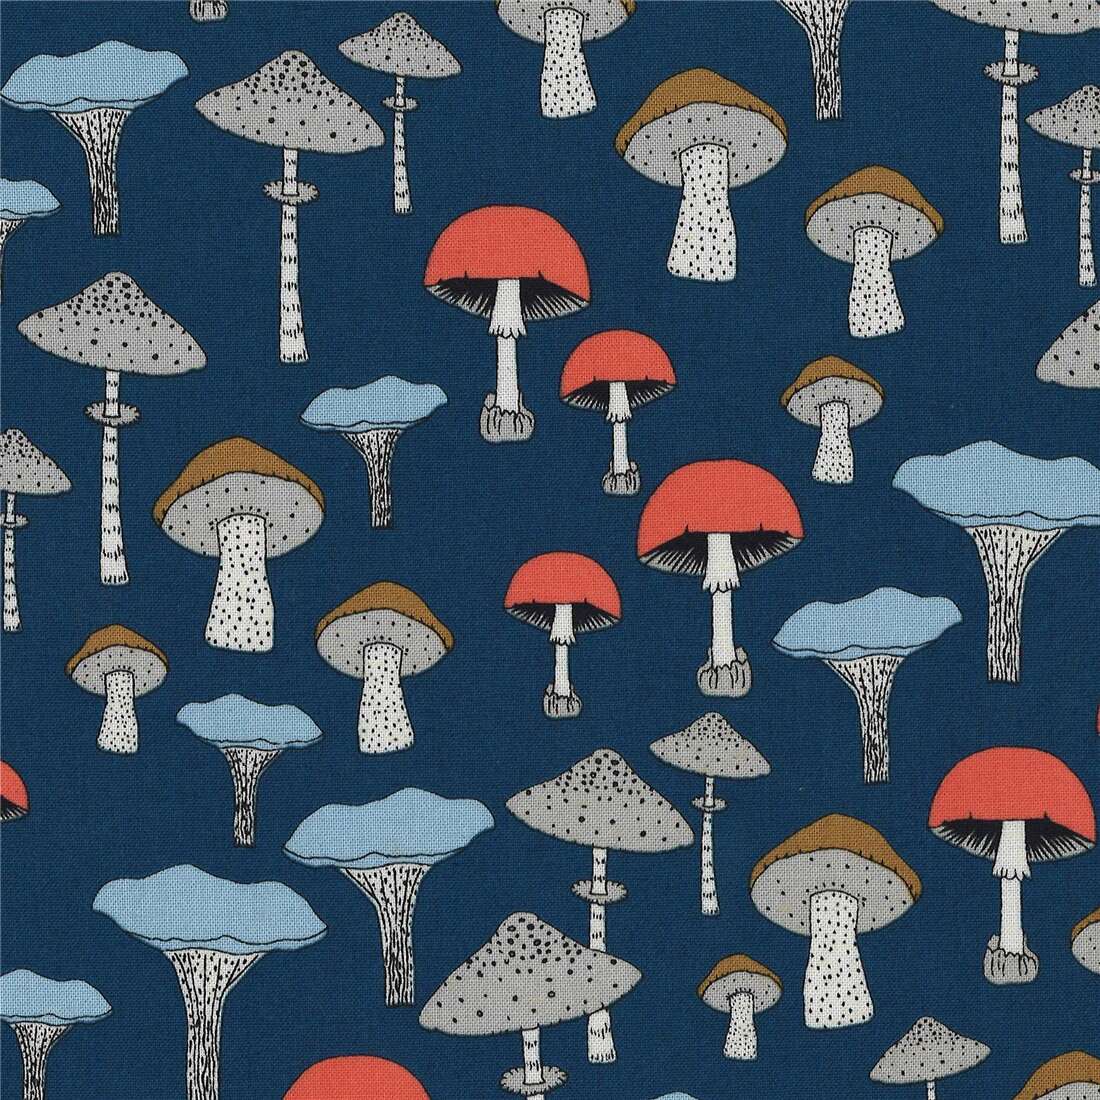 Forest Gifts Mushroom Illustrations Fabric by Michael Miller - modeS4u